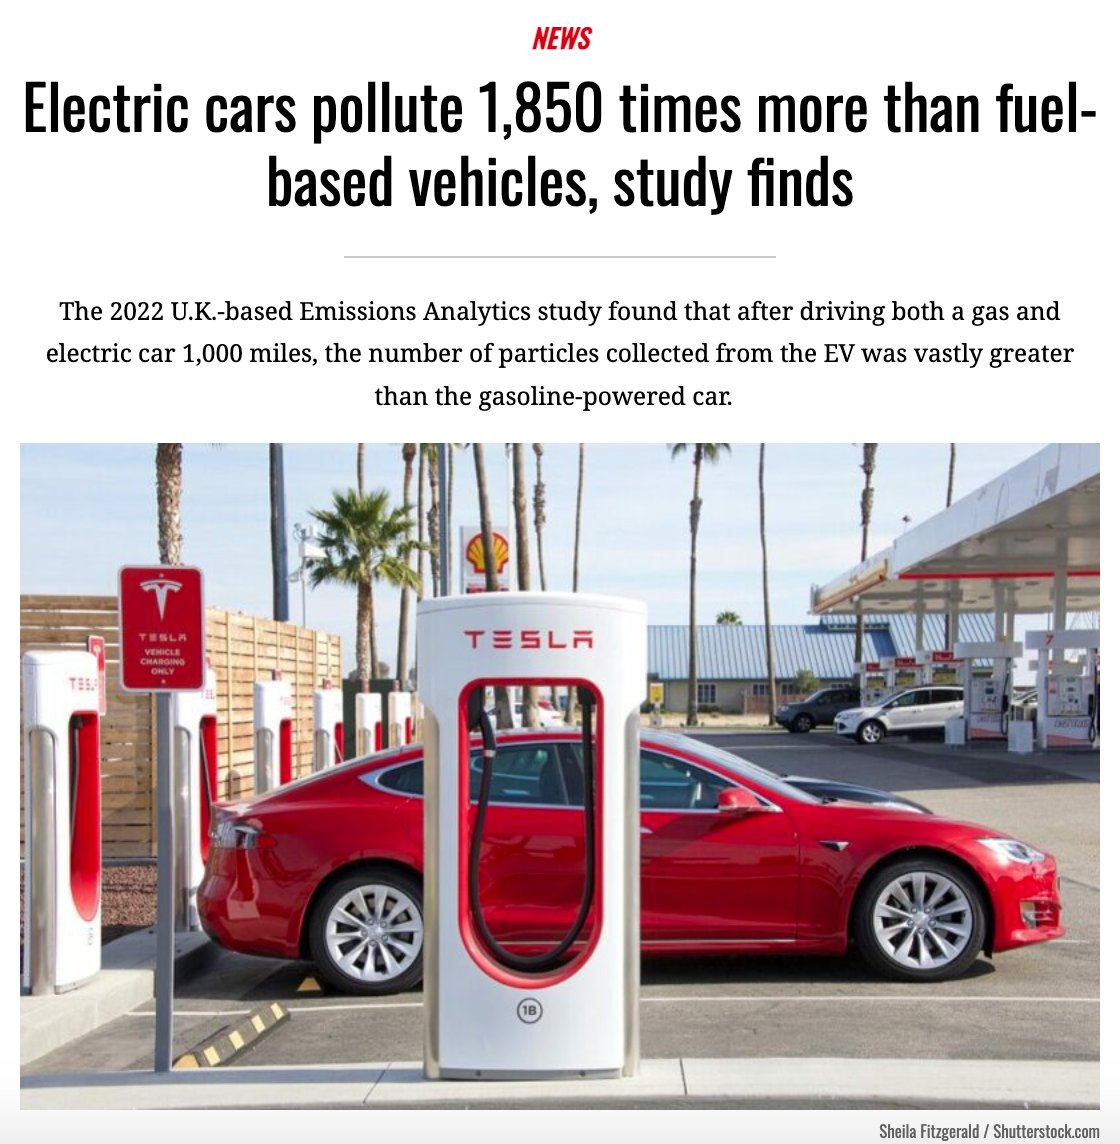 Electric cars pollute 1,850 times more than fuel-based vehicles